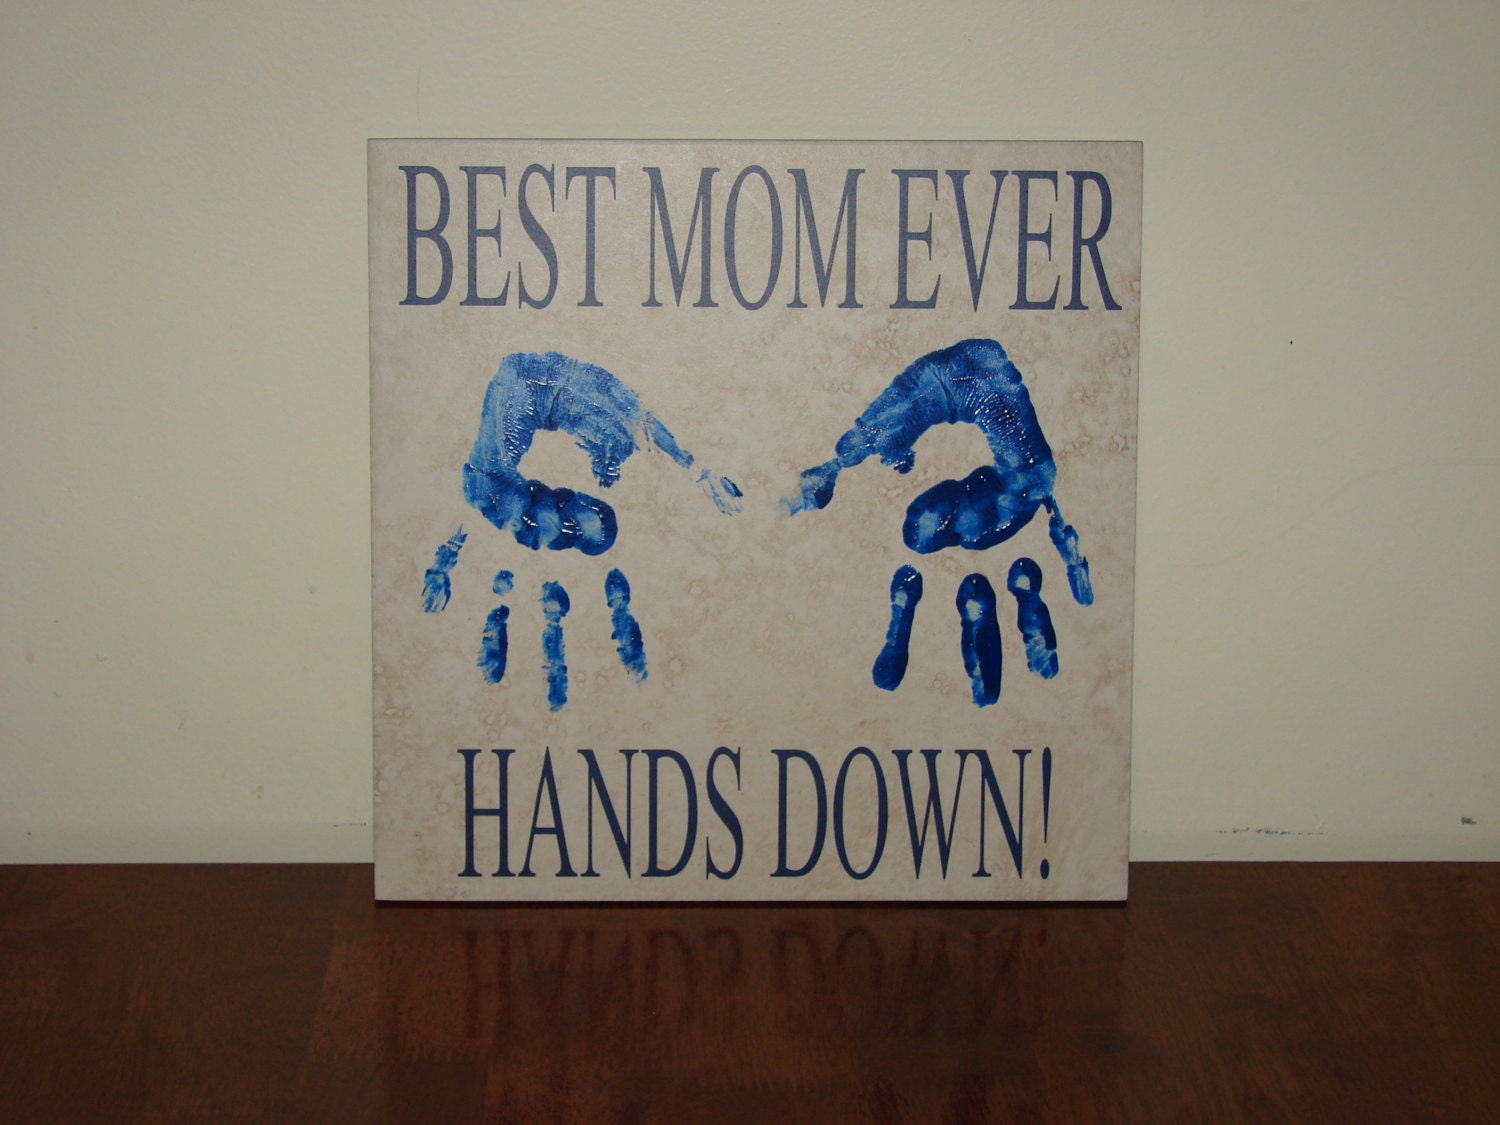 Best Mom Ever Hands Down Decorative Tile With Vinyl Words